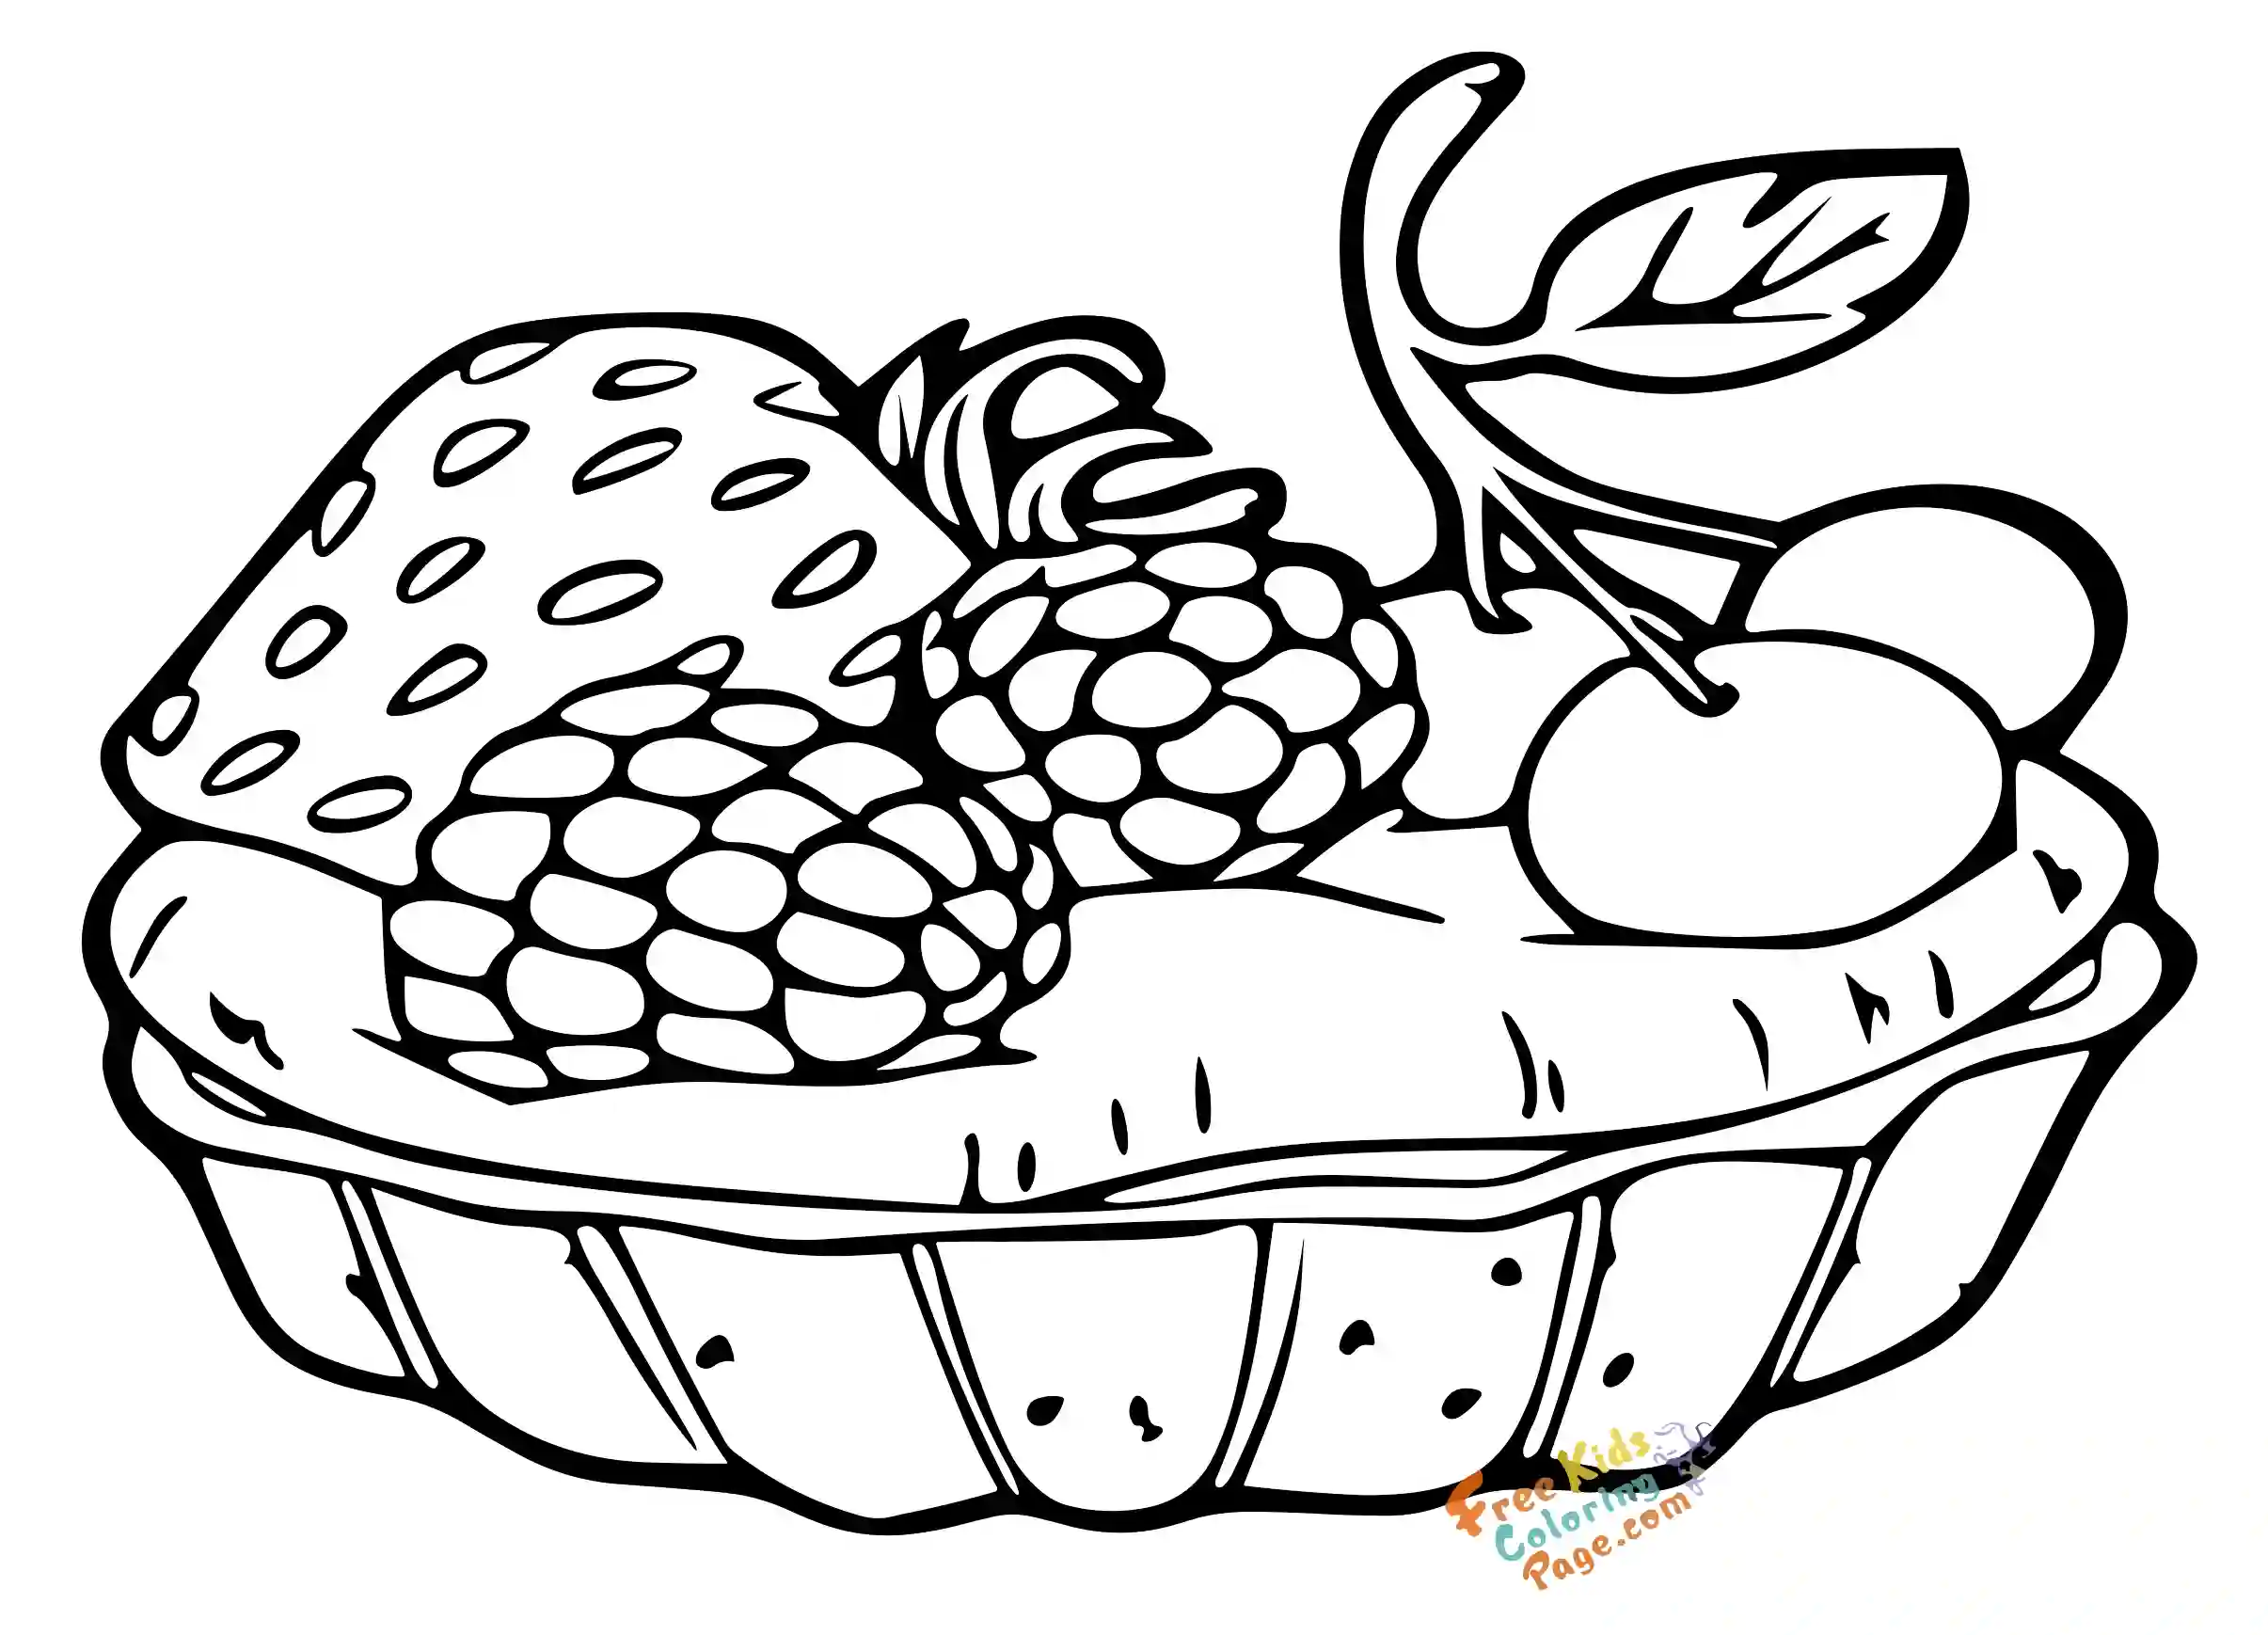 Berries pie coloring pages to print